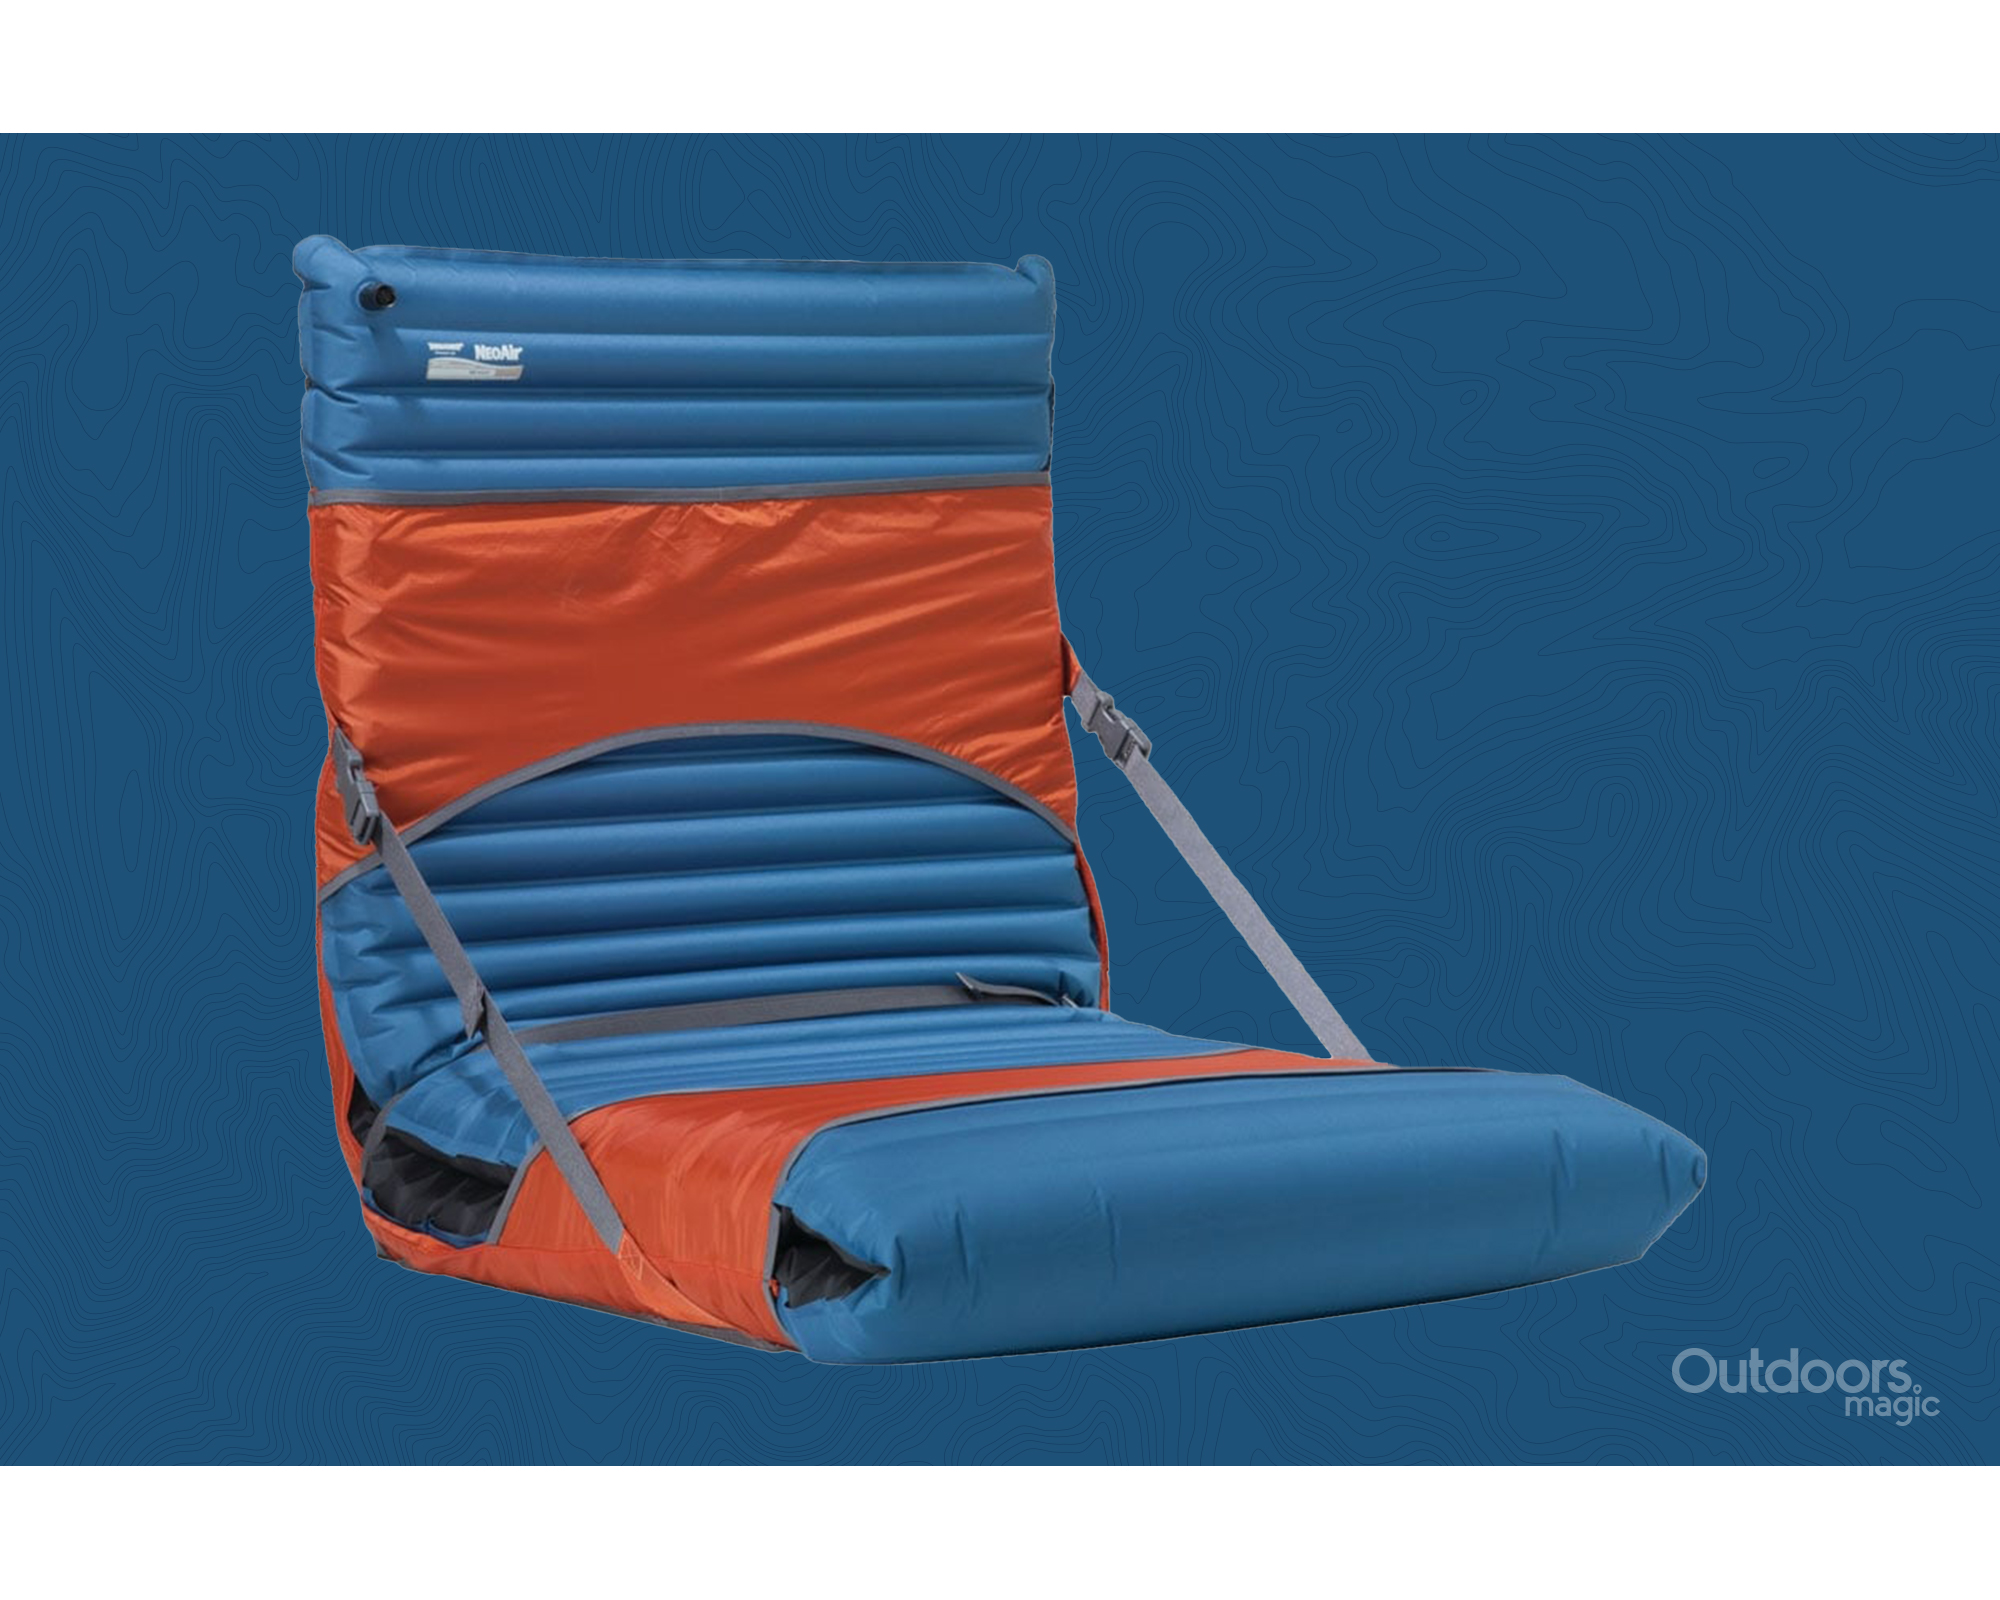 Best Camping Chairs 2021: Therm-a-rest Air Chair